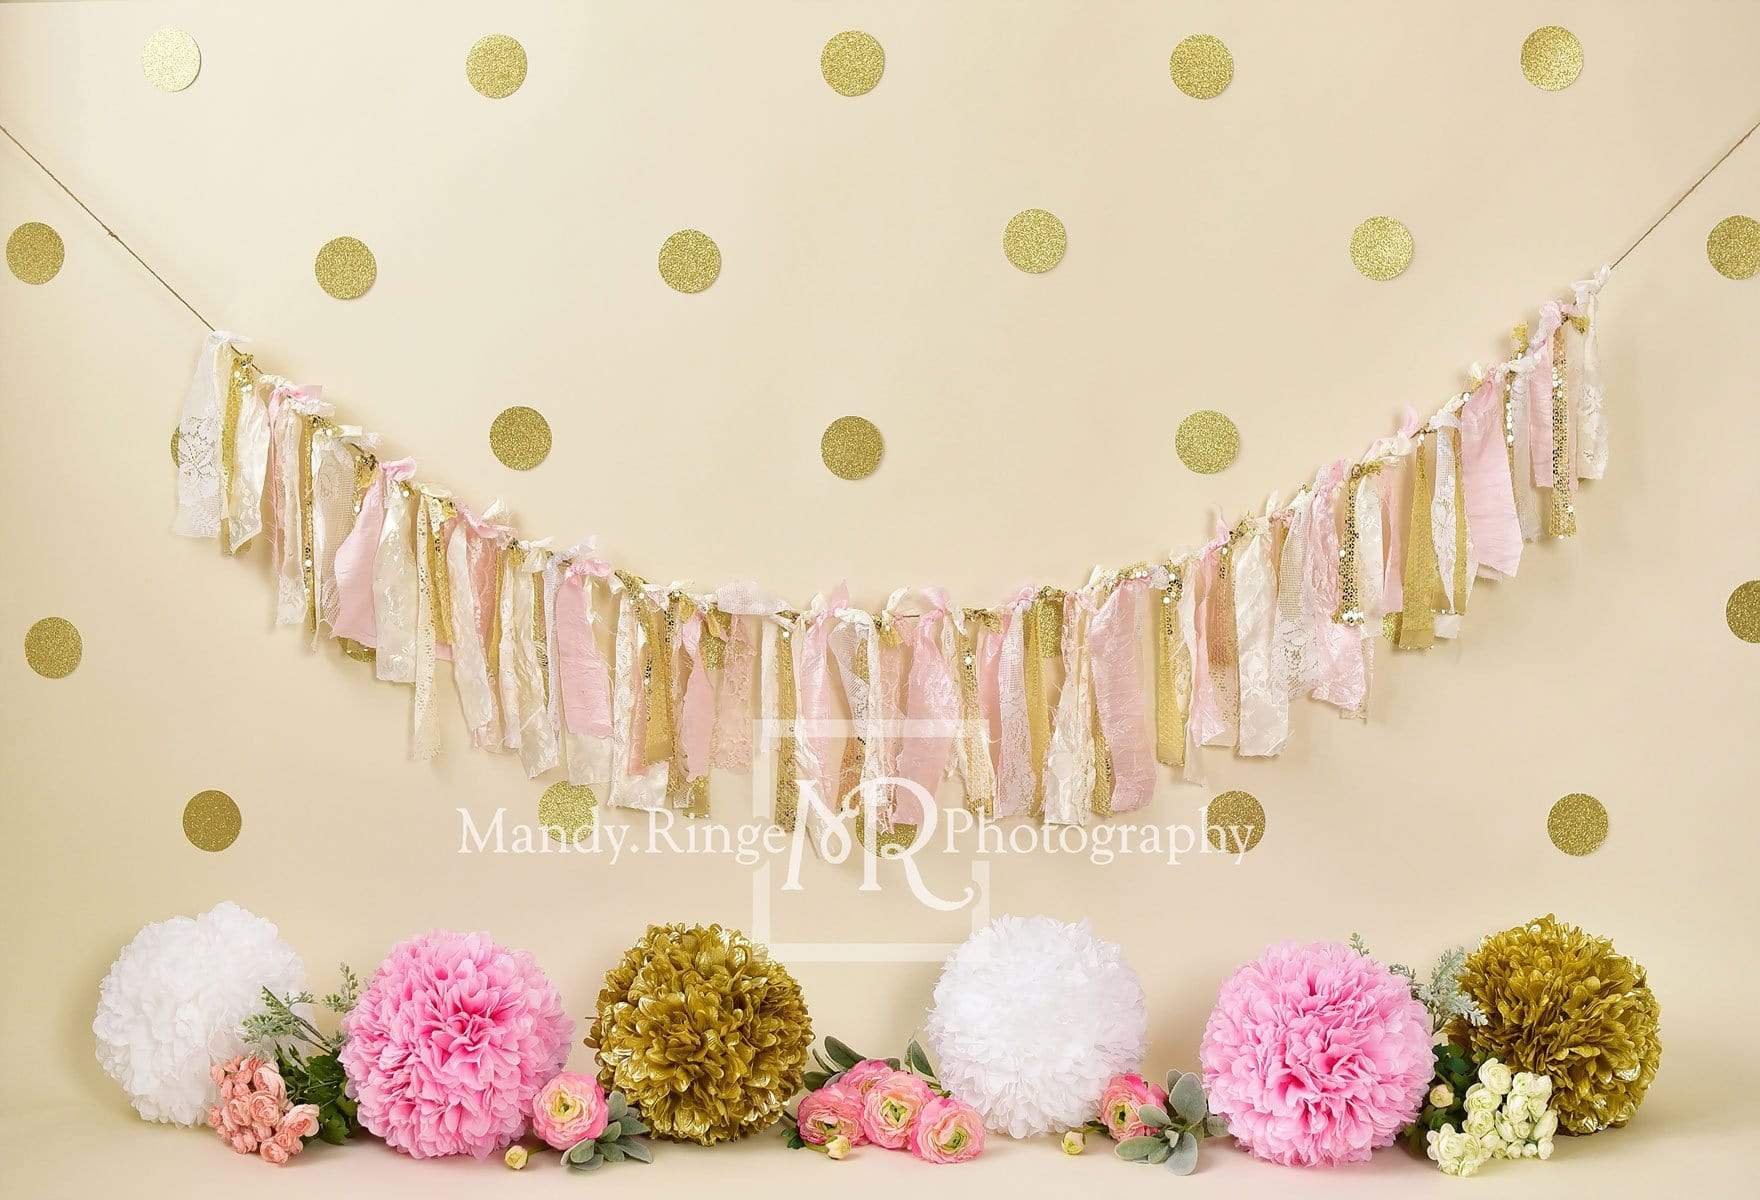 Kate Pink and Gold with Polkadots Birthday Backdrop for Photography Designed by Mandy Ringe Photography